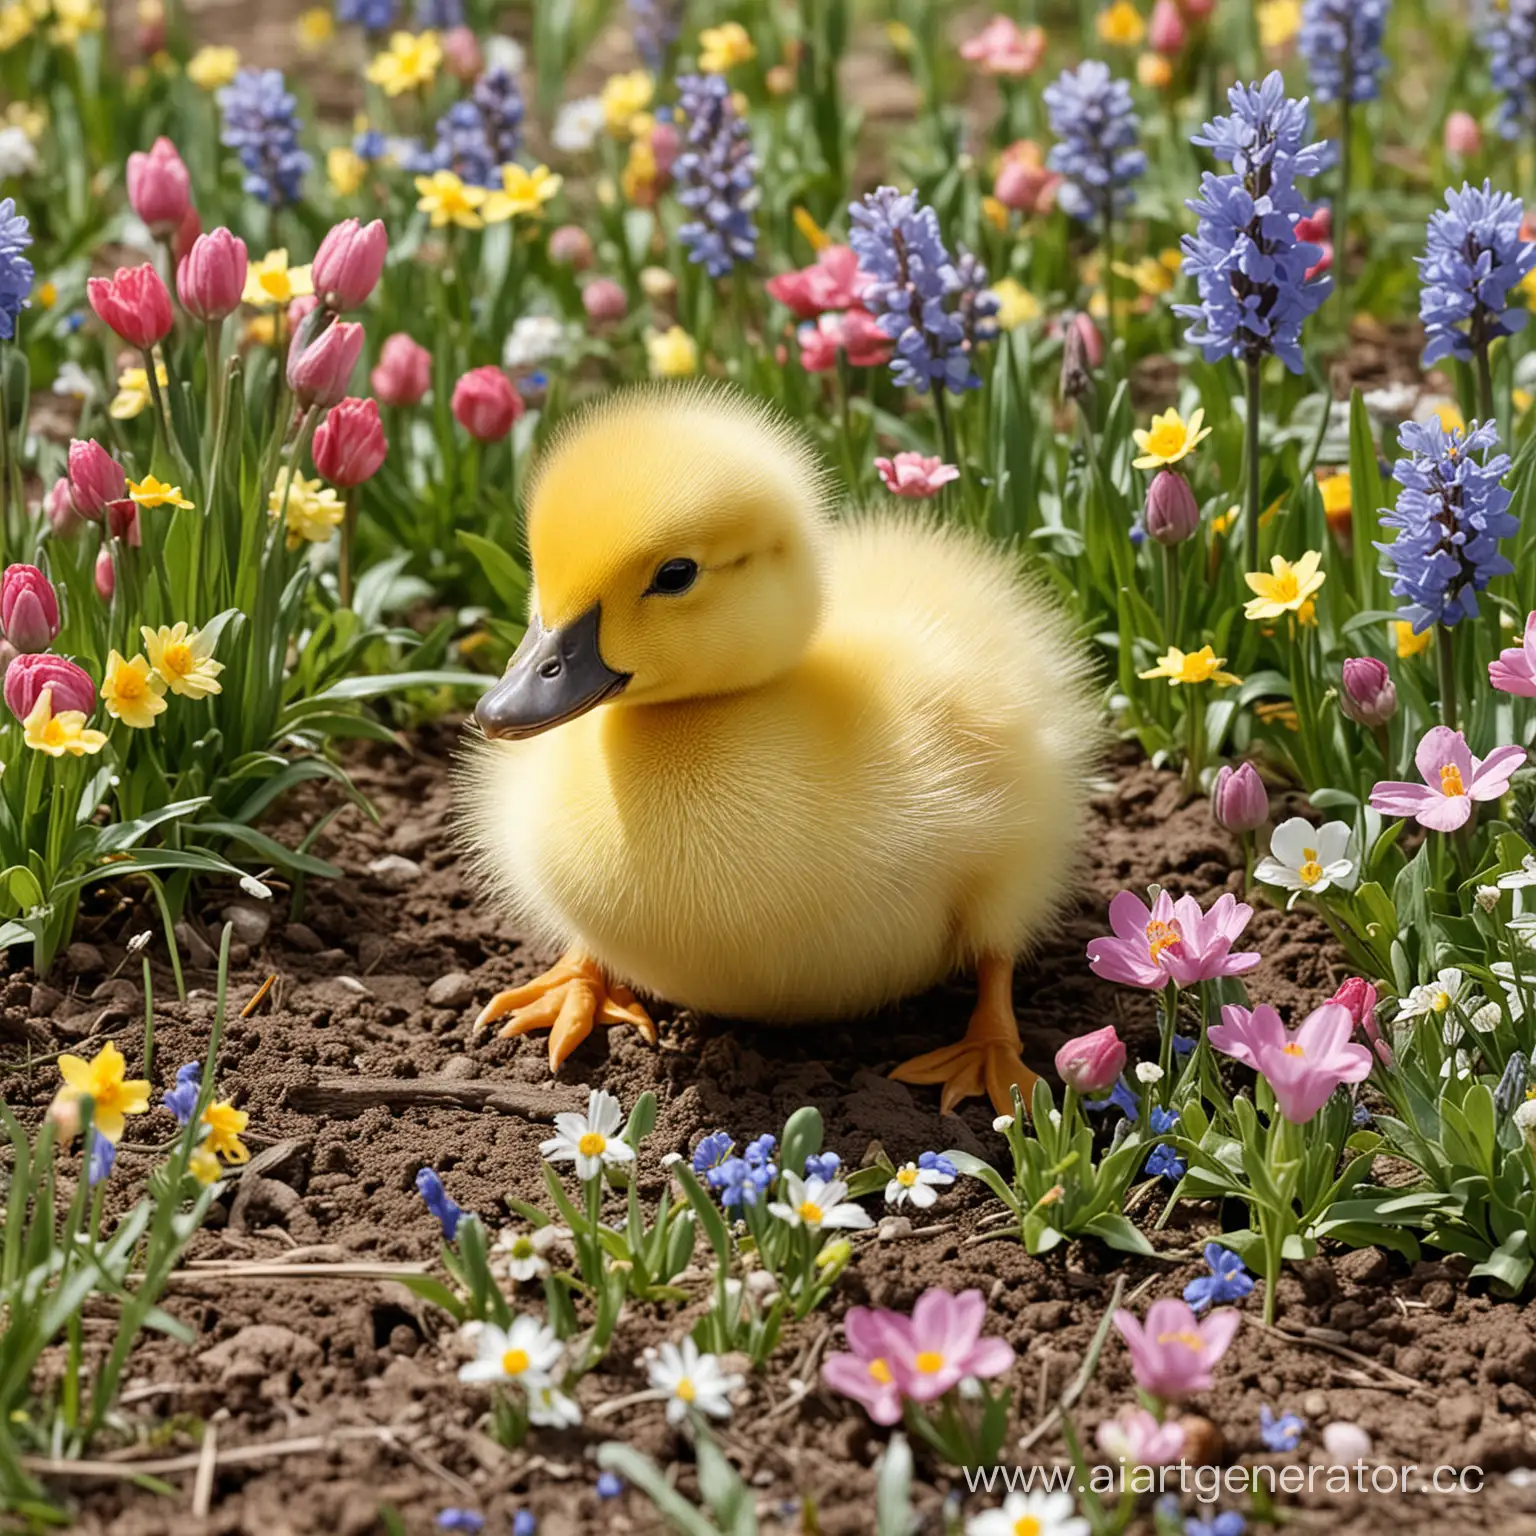 Adorable-Duckling-Frolicking-Among-Vibrant-Spring-Flowers